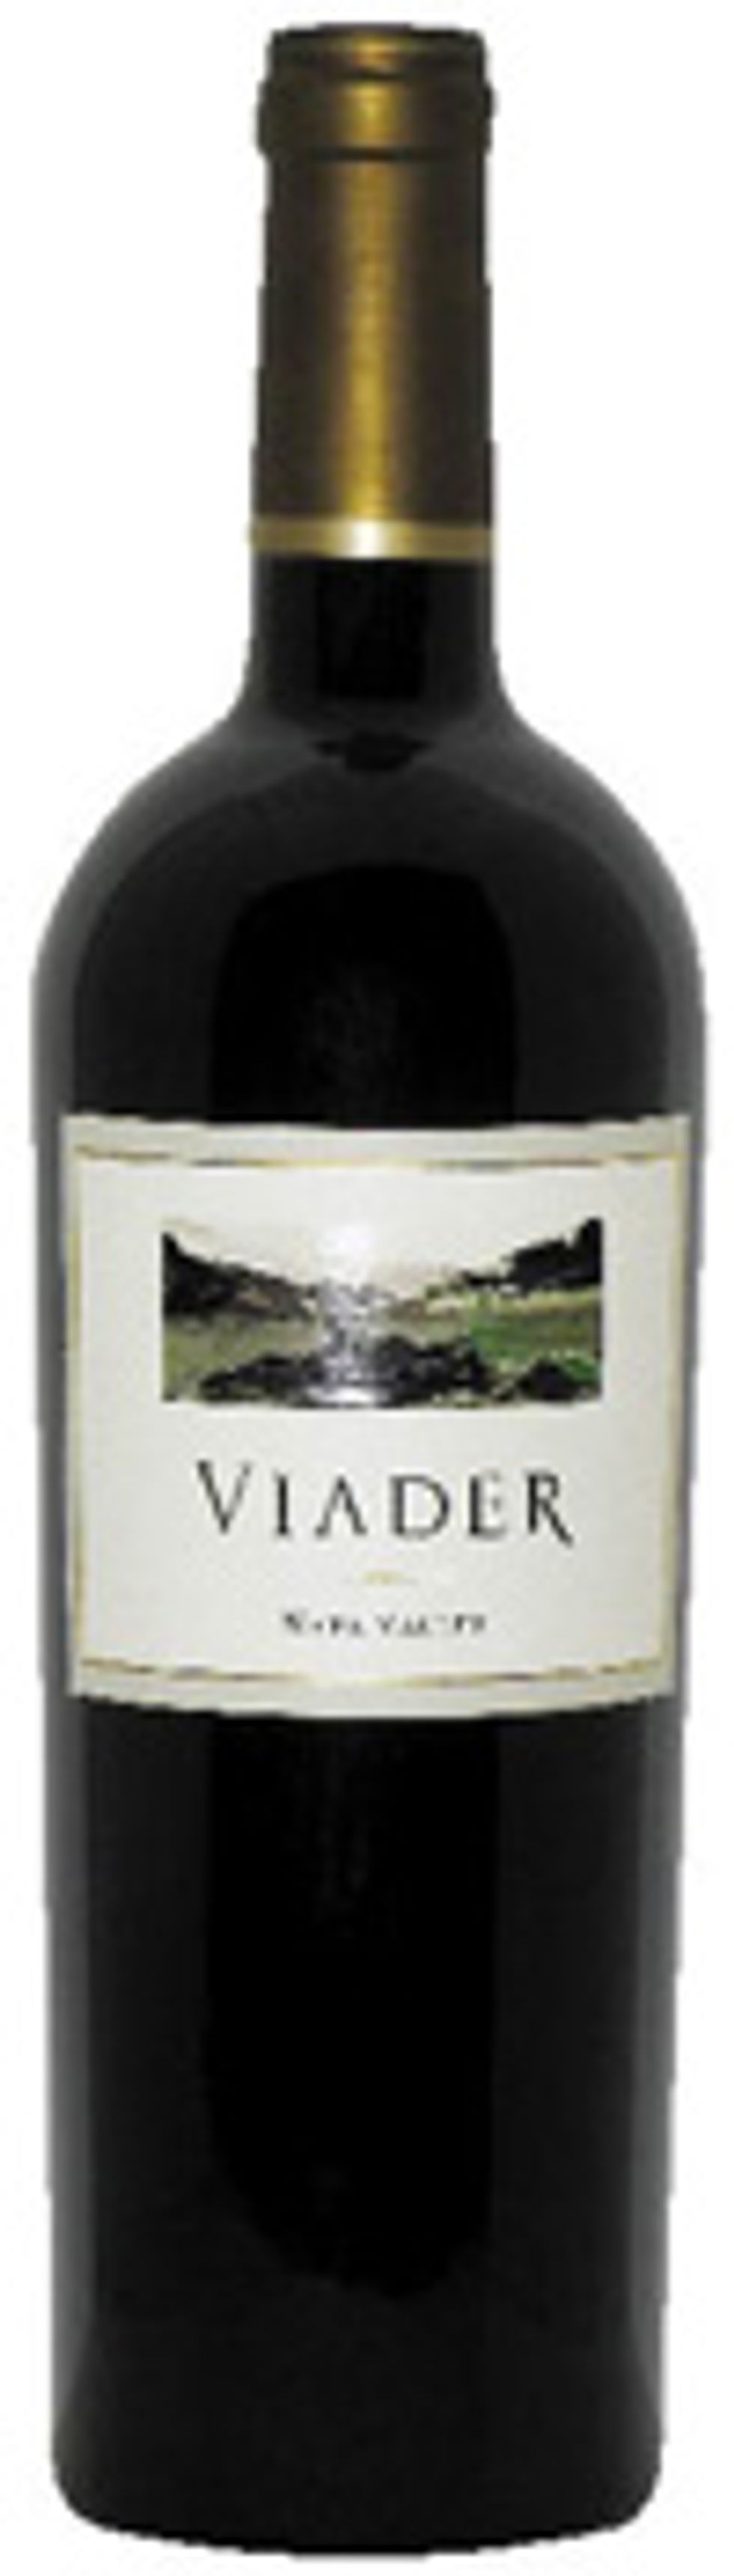 Holiday Wine Buying Guide: Viader